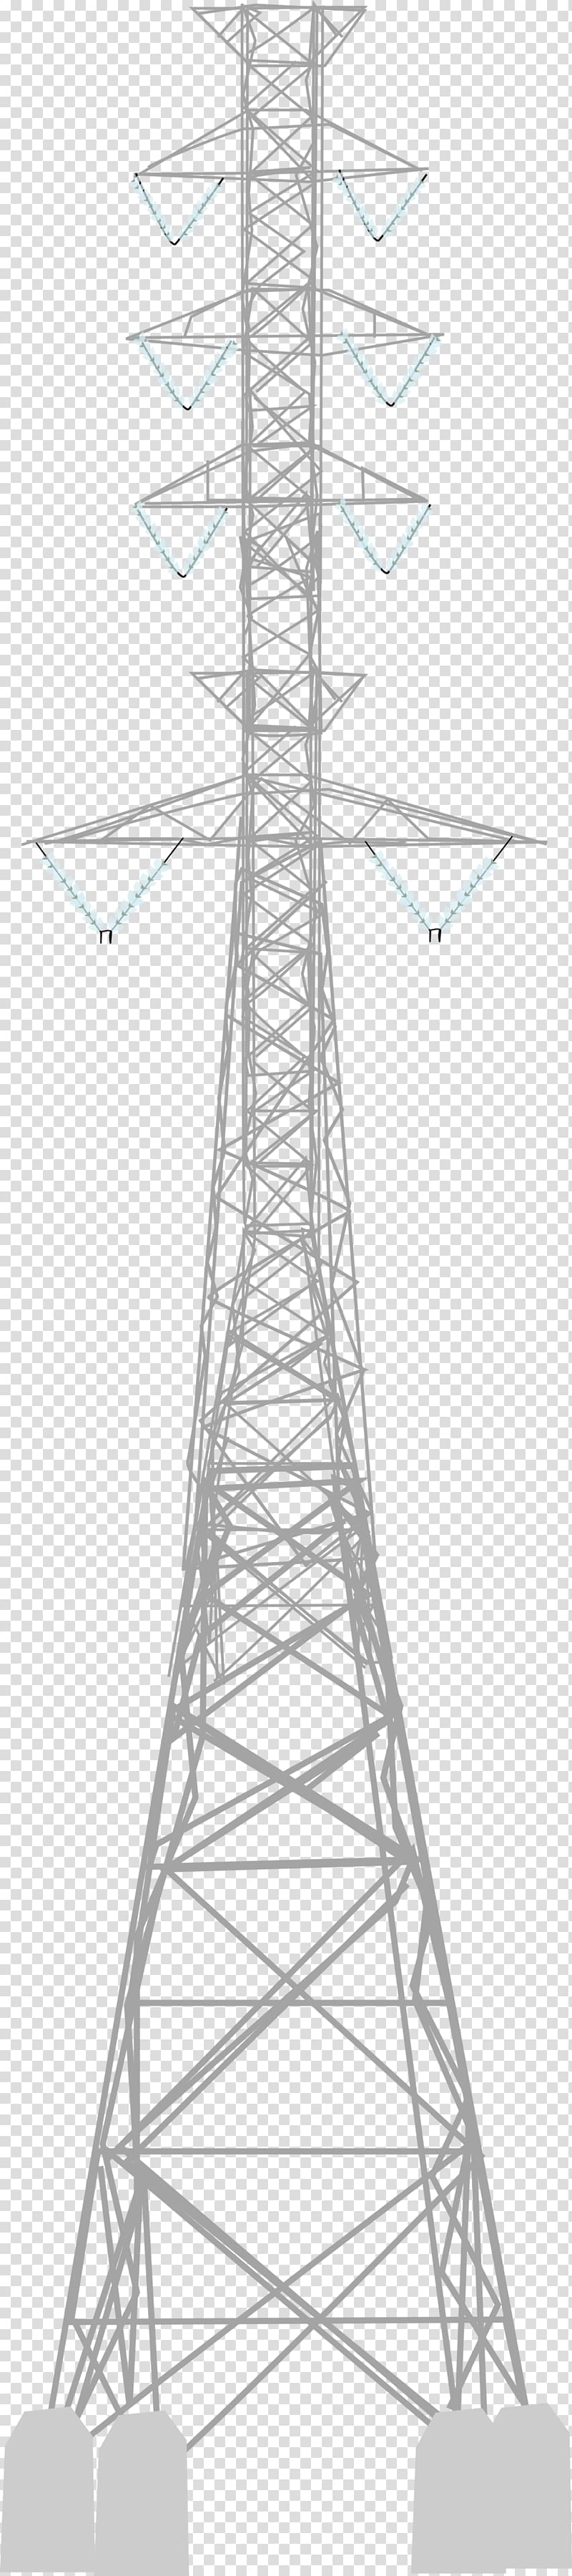 Transmission tower Electricity Drawing Public utility, design transparent background PNG clipart